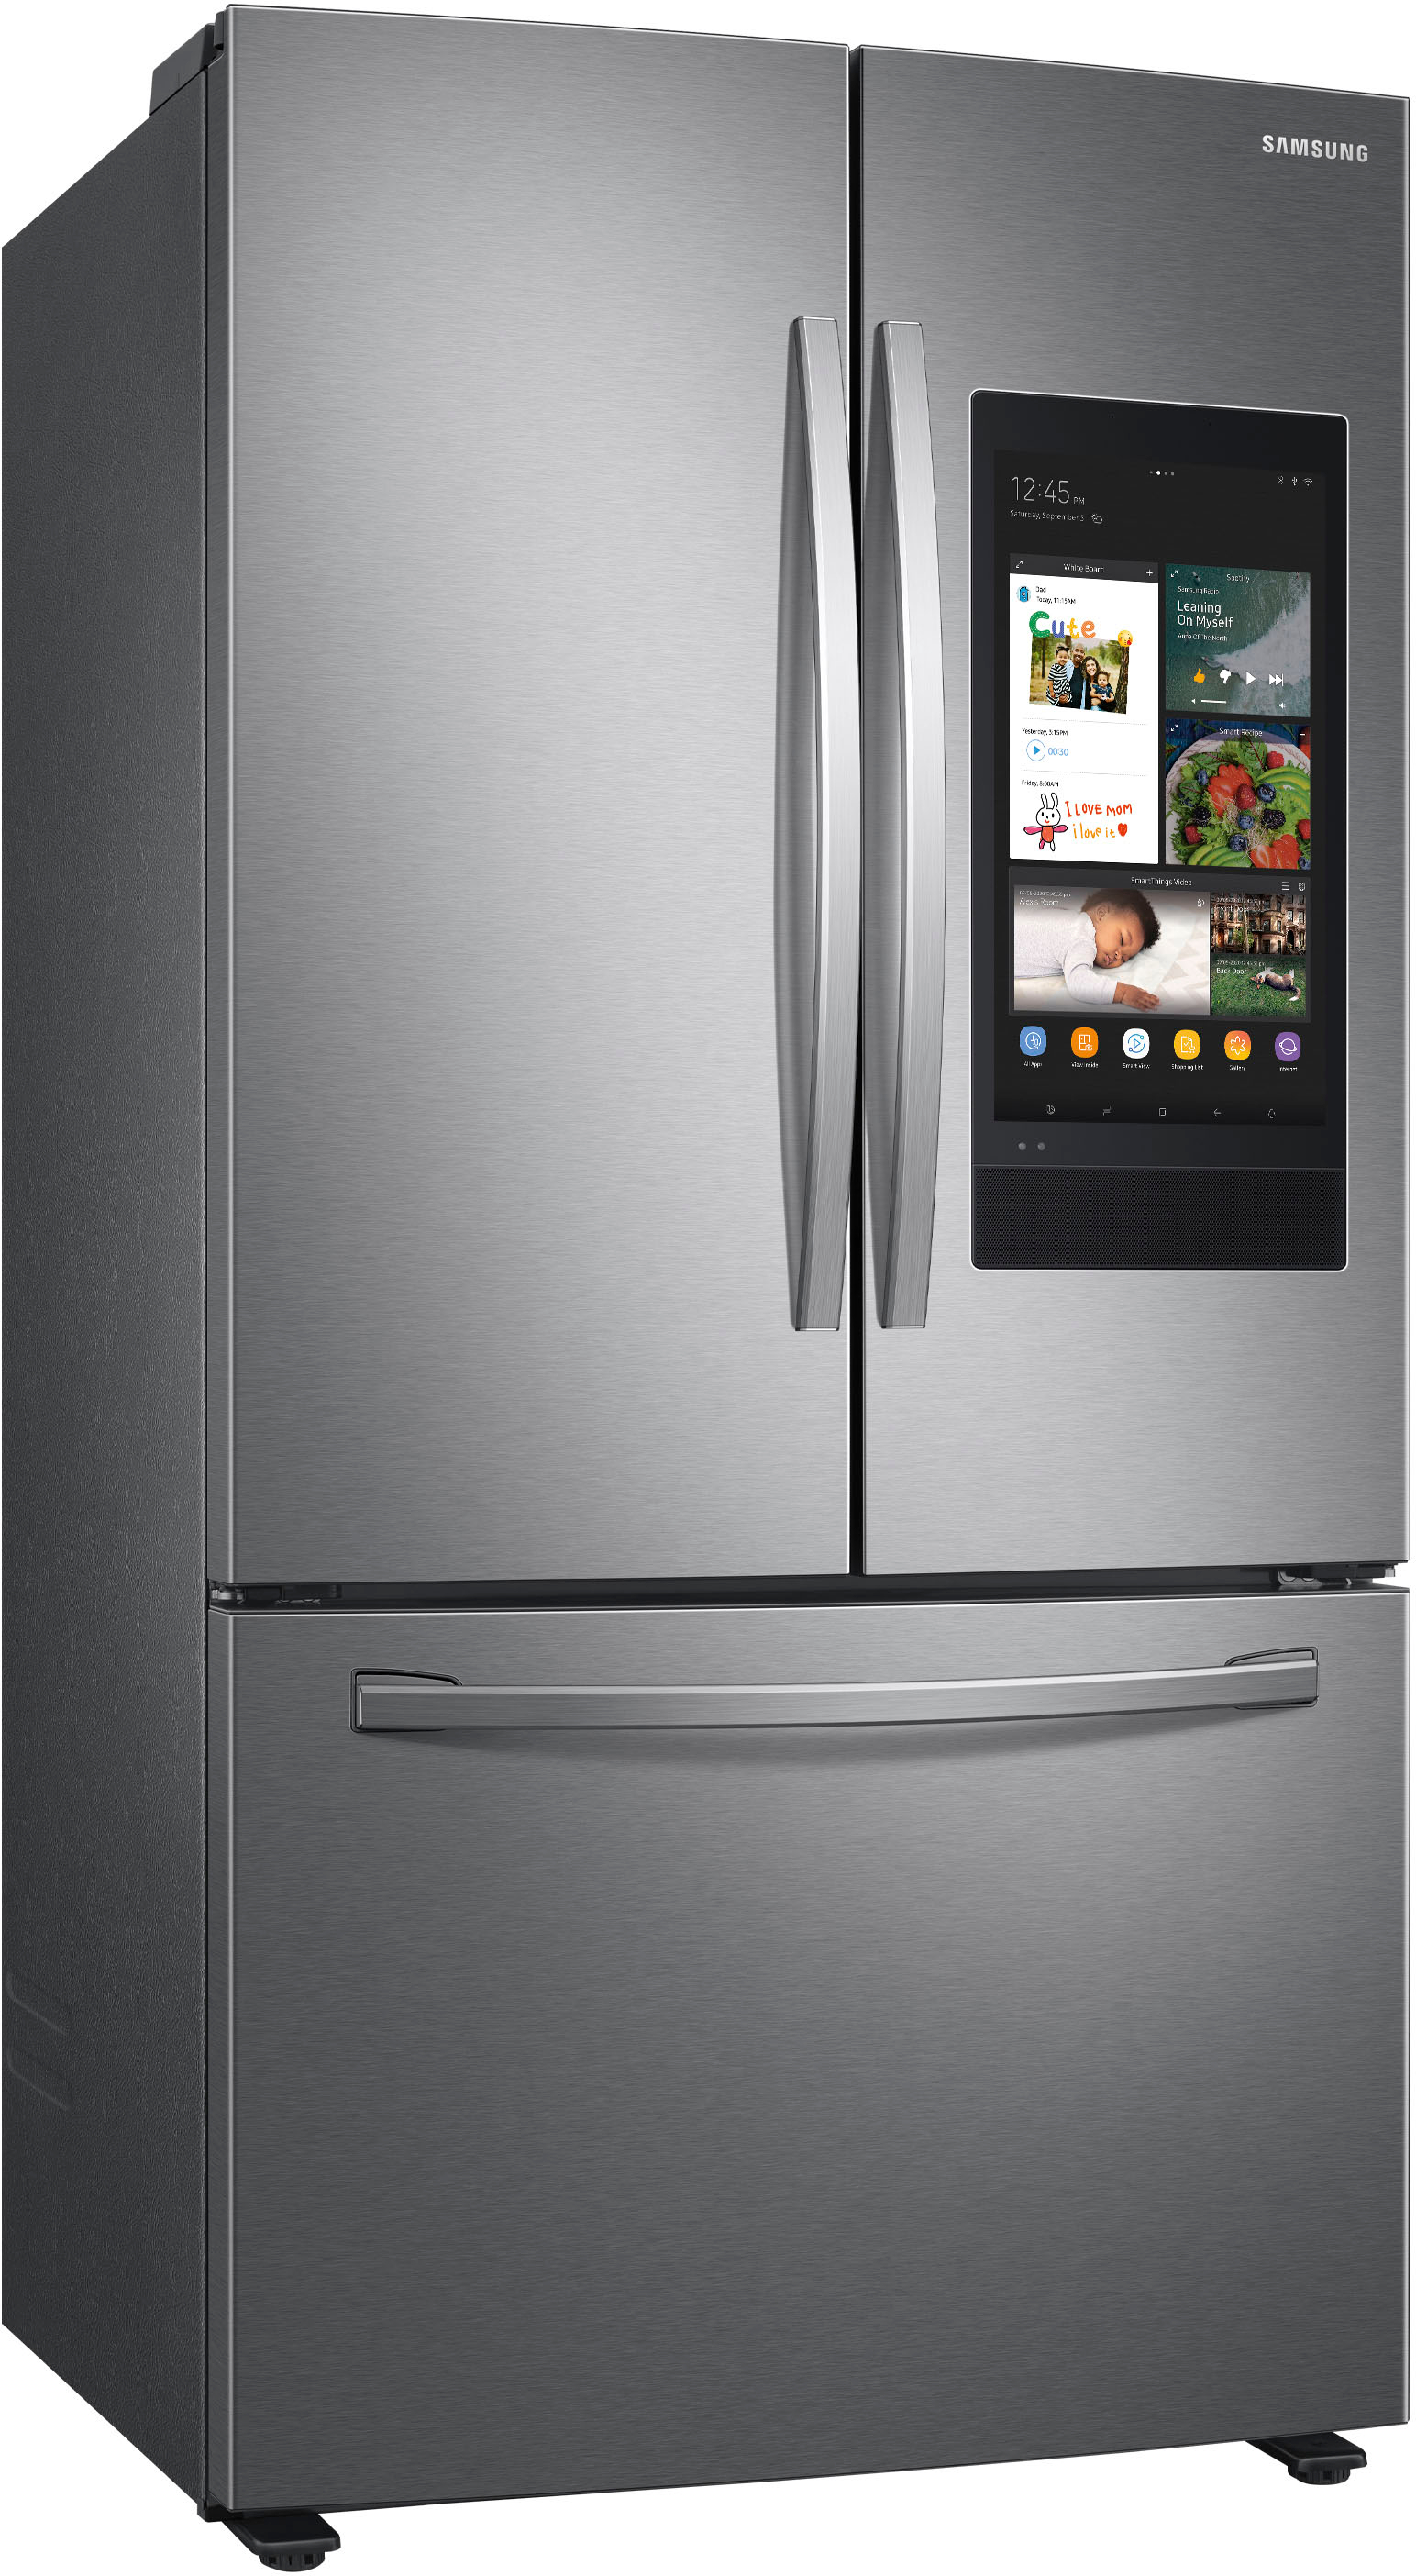 Angle View: Samsung - 28 cu. ft. 3-Door French Door Refrigerator with Family Hub™ - Stainless steel